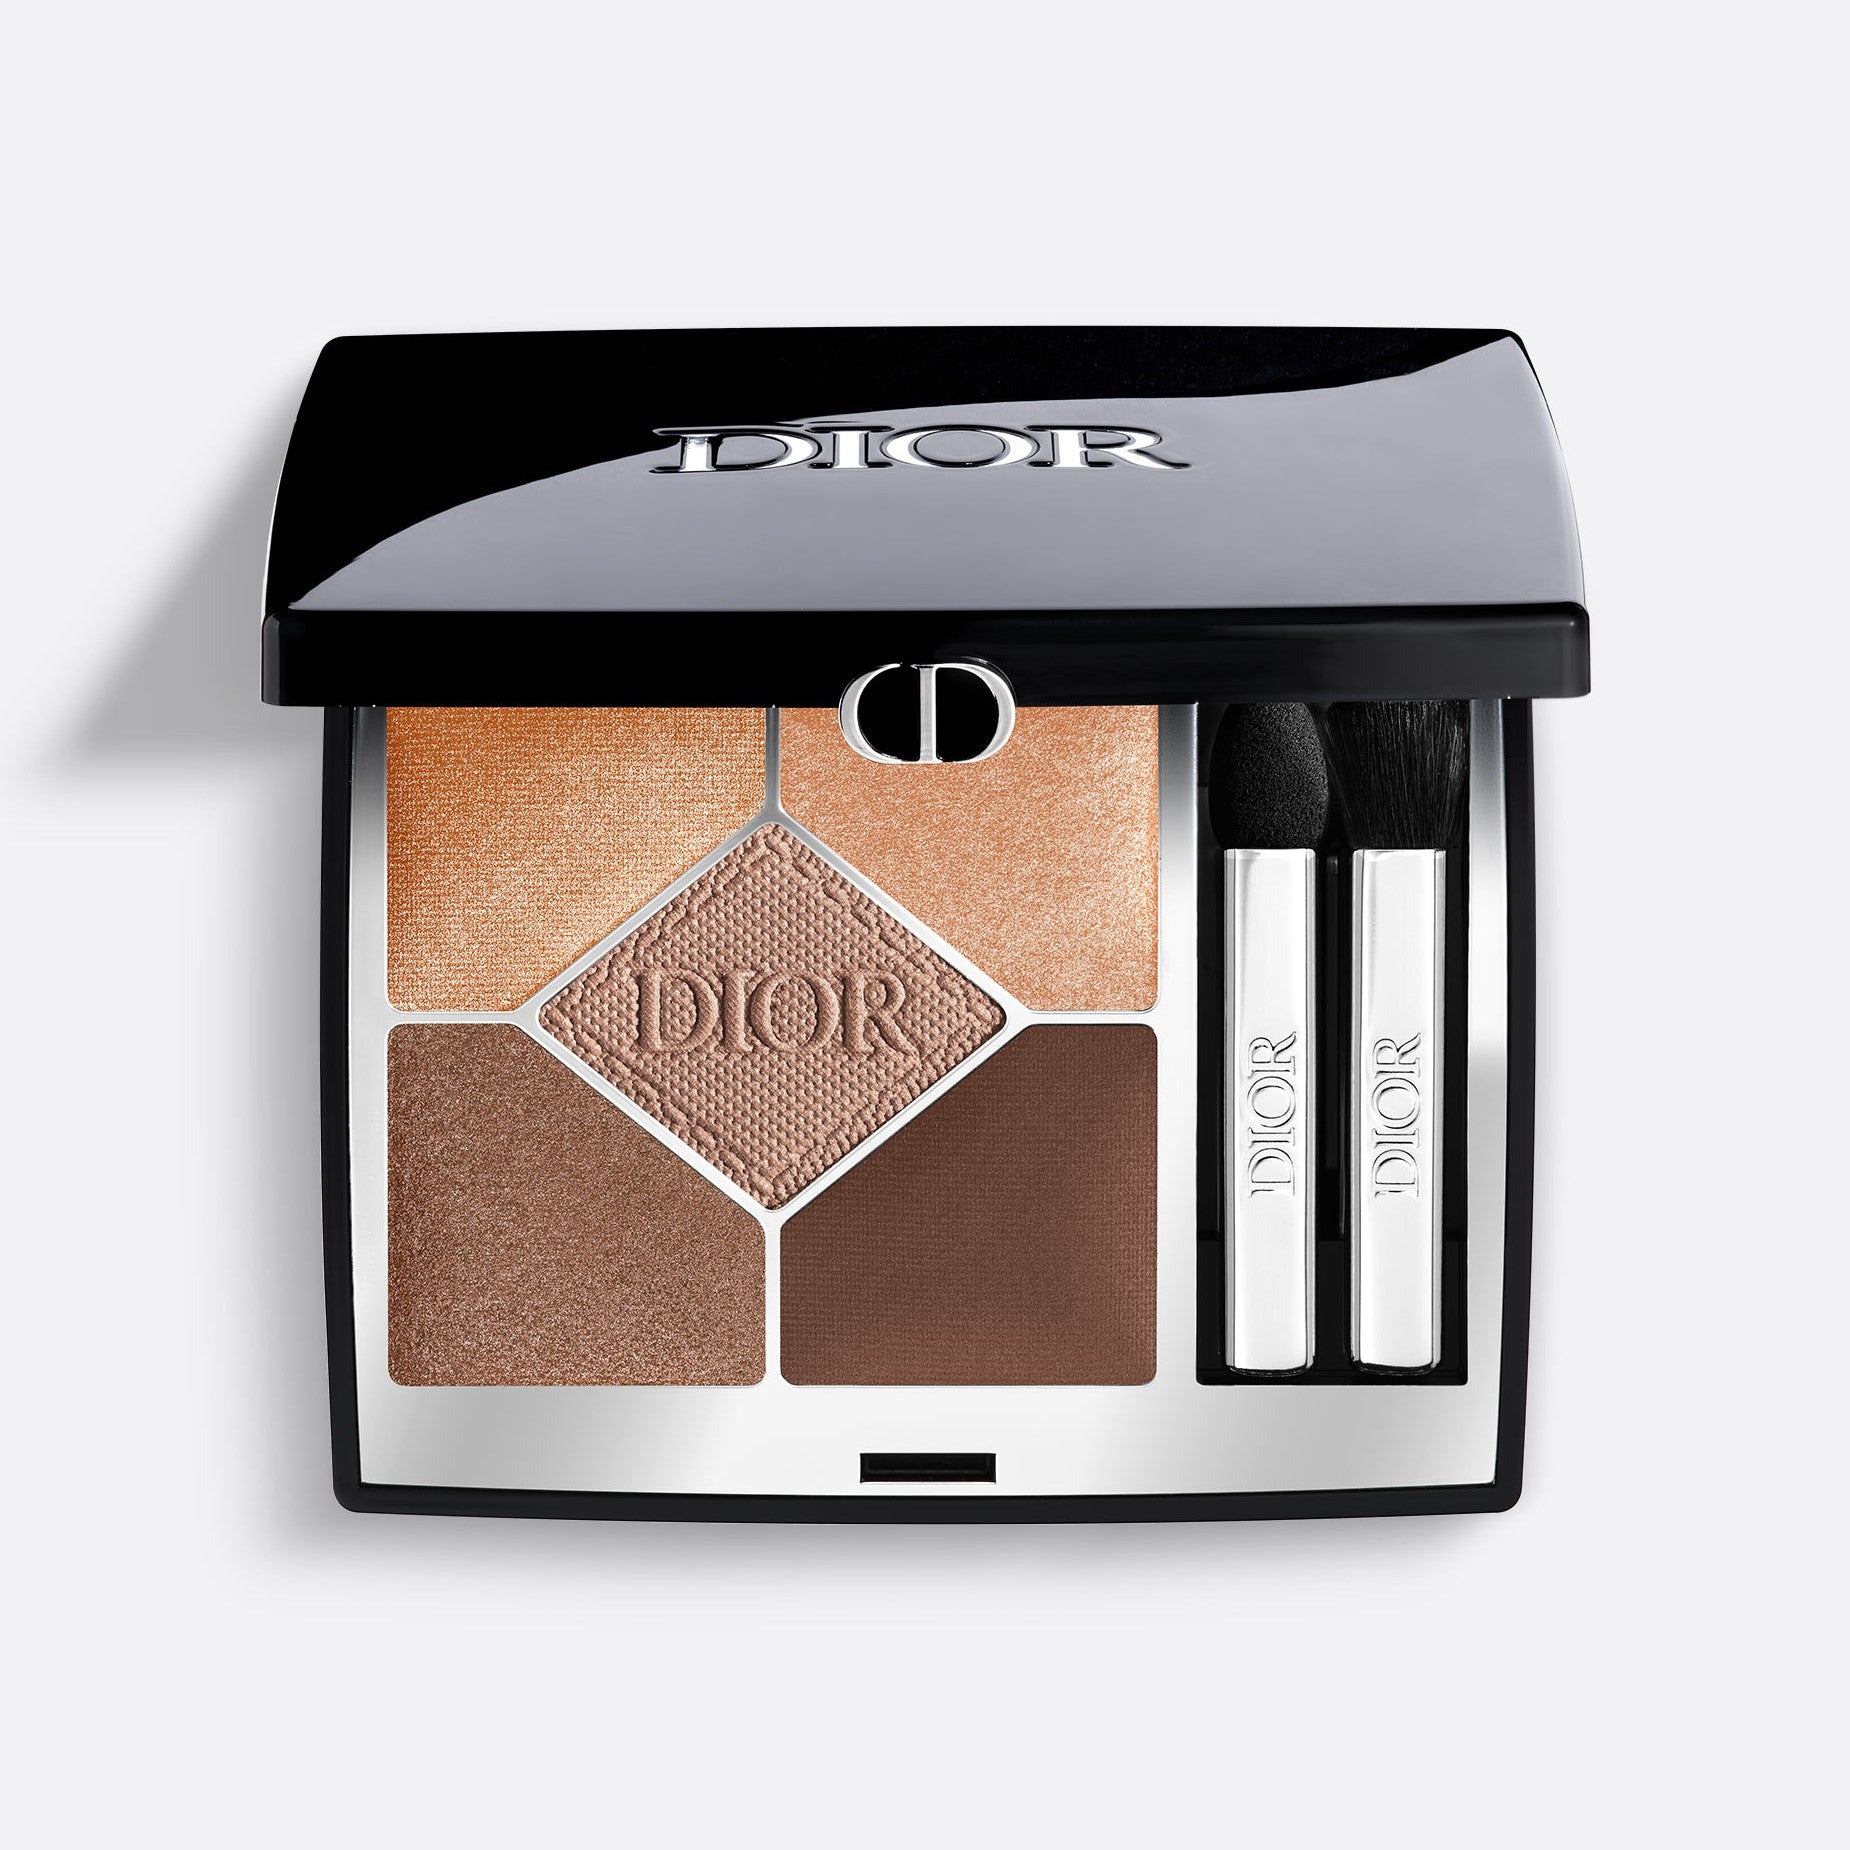 DIORSHOW 5 COULEURS | Eye Makeup Palette - 5 Eyeshadows - High Colour and Long Wear